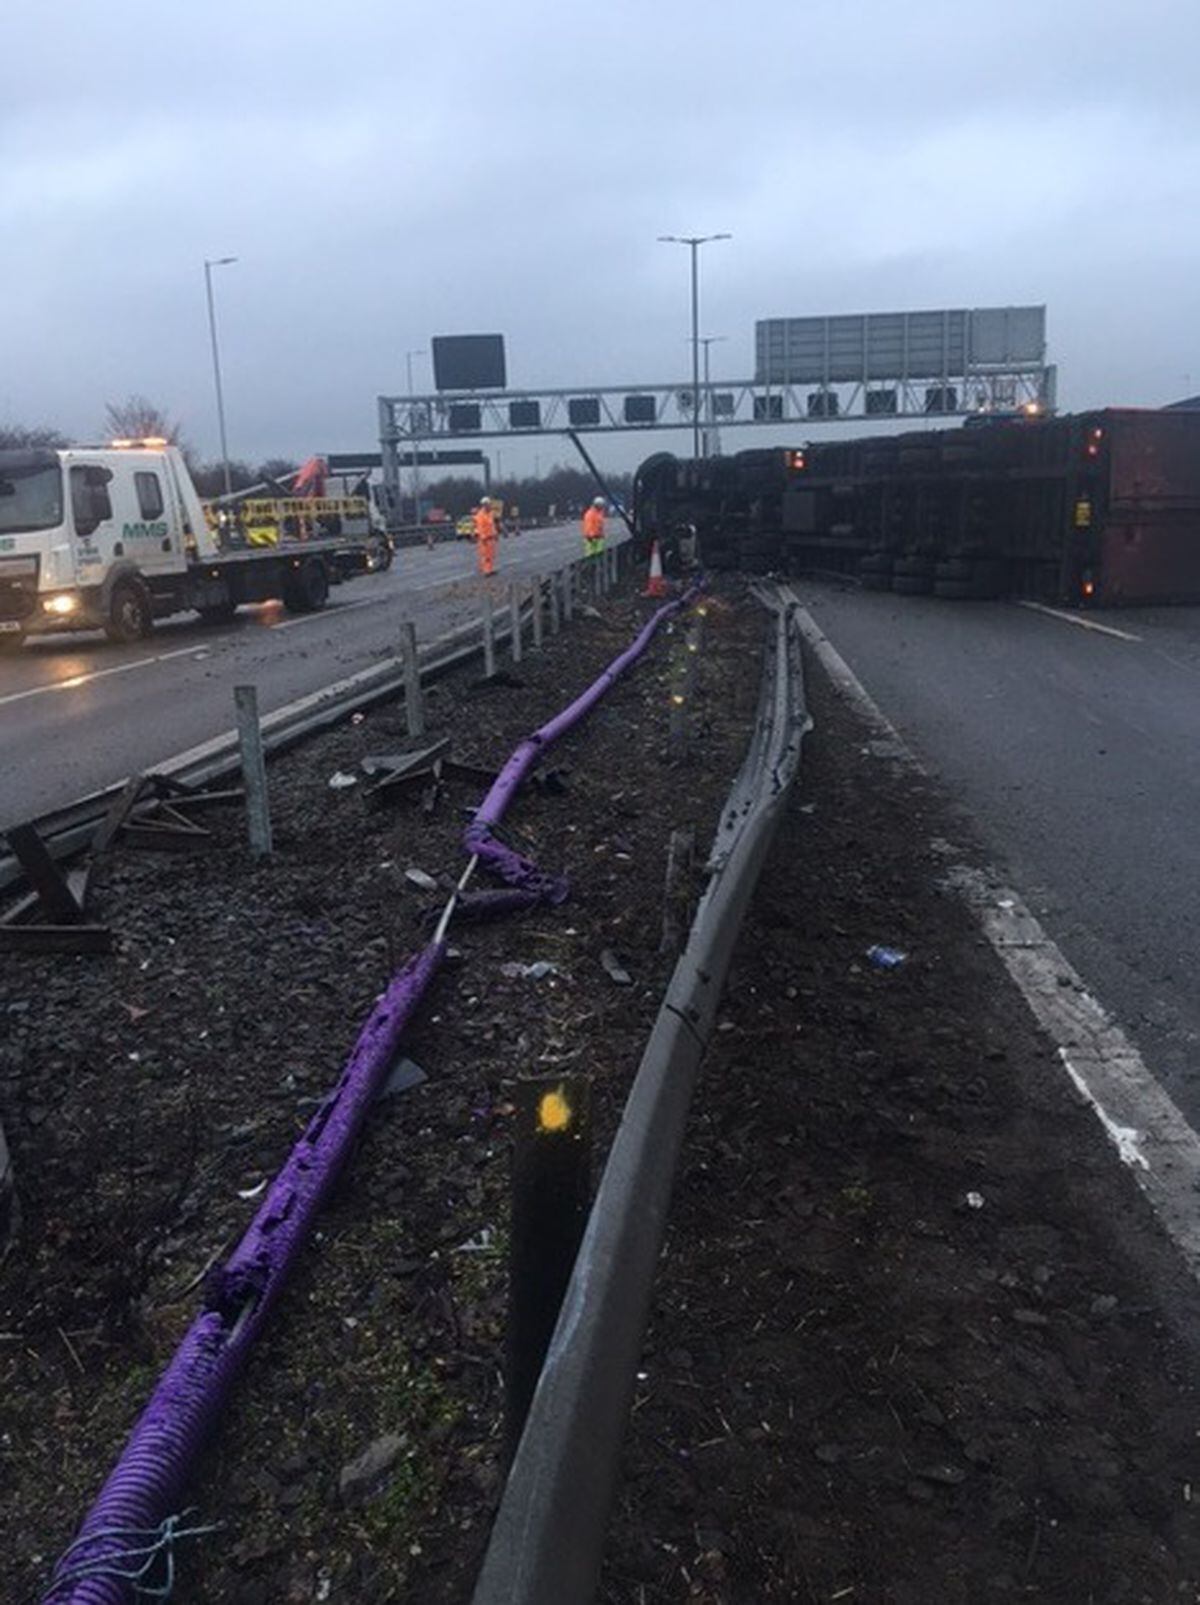 Emergency services working at the scene of the crash on the M6. Photo: National Highways